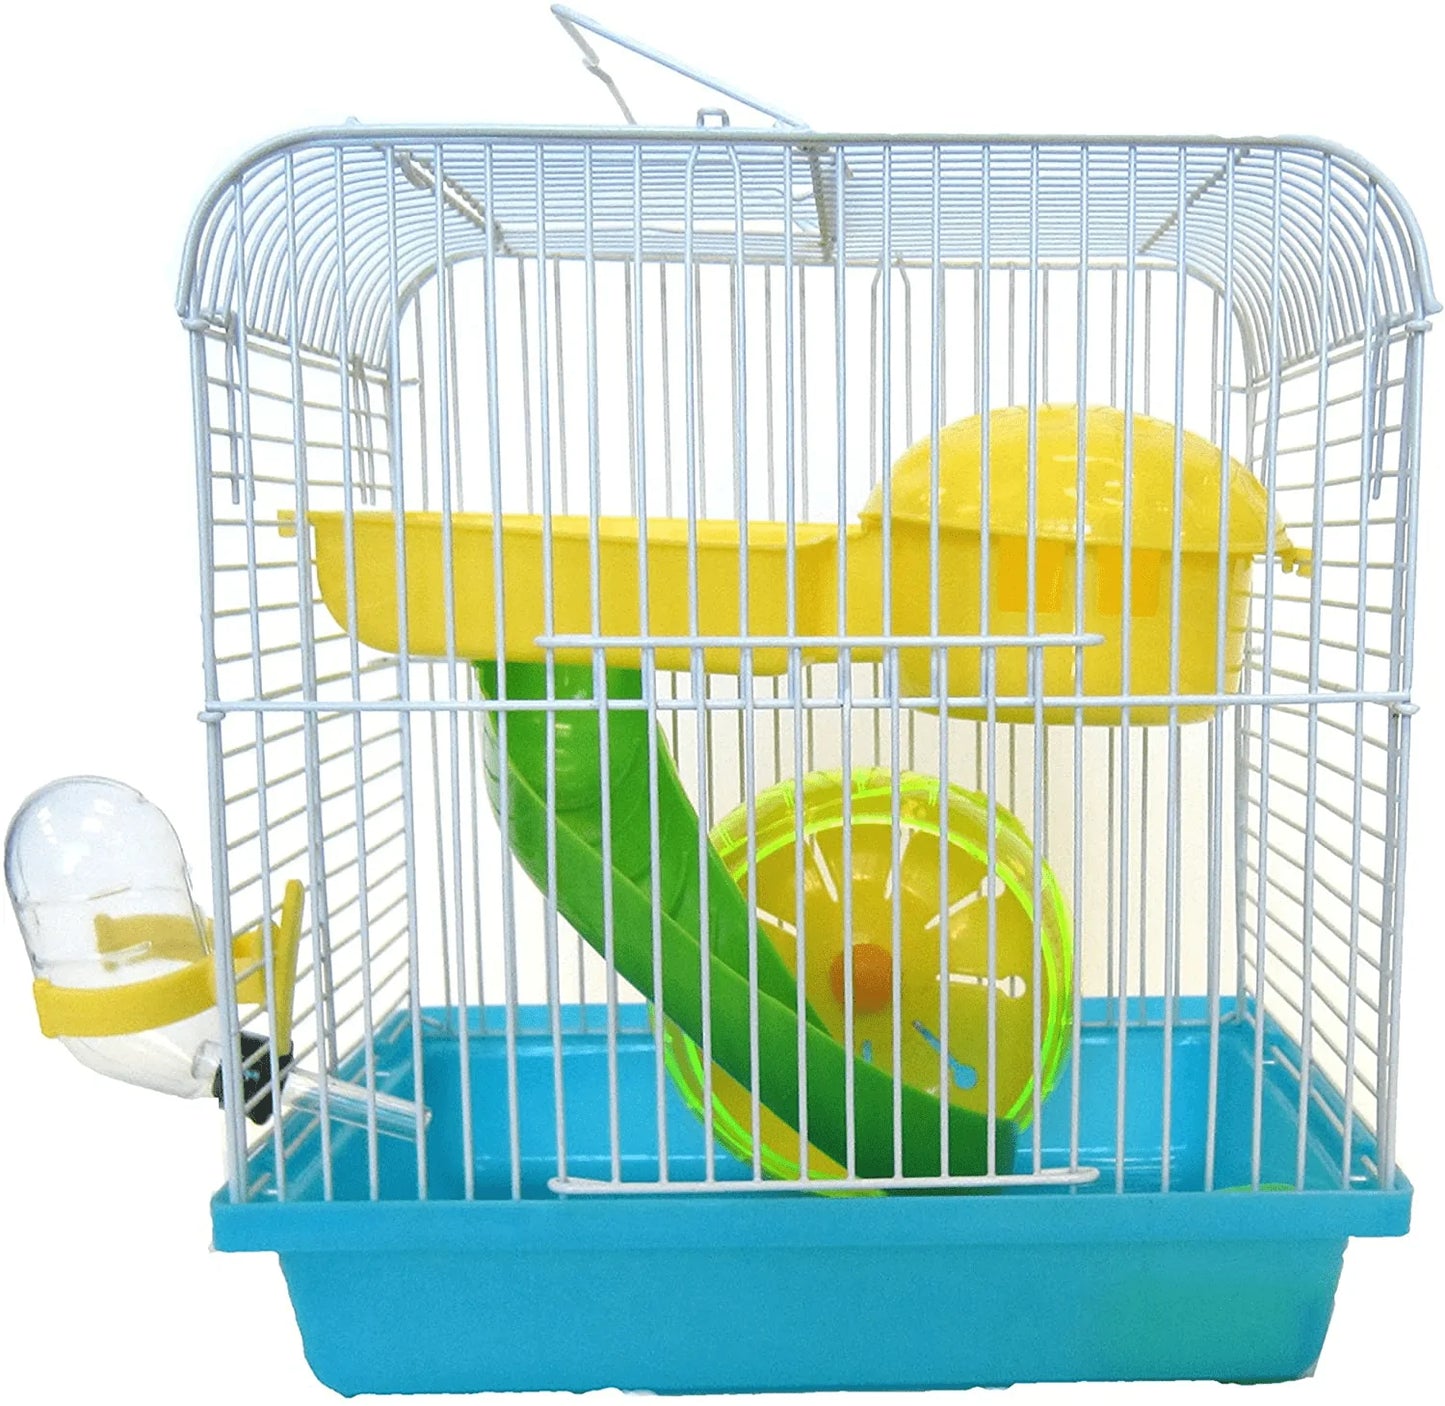 YML Dwarf Hamster Mice Travel Cage with Accessories, Blue